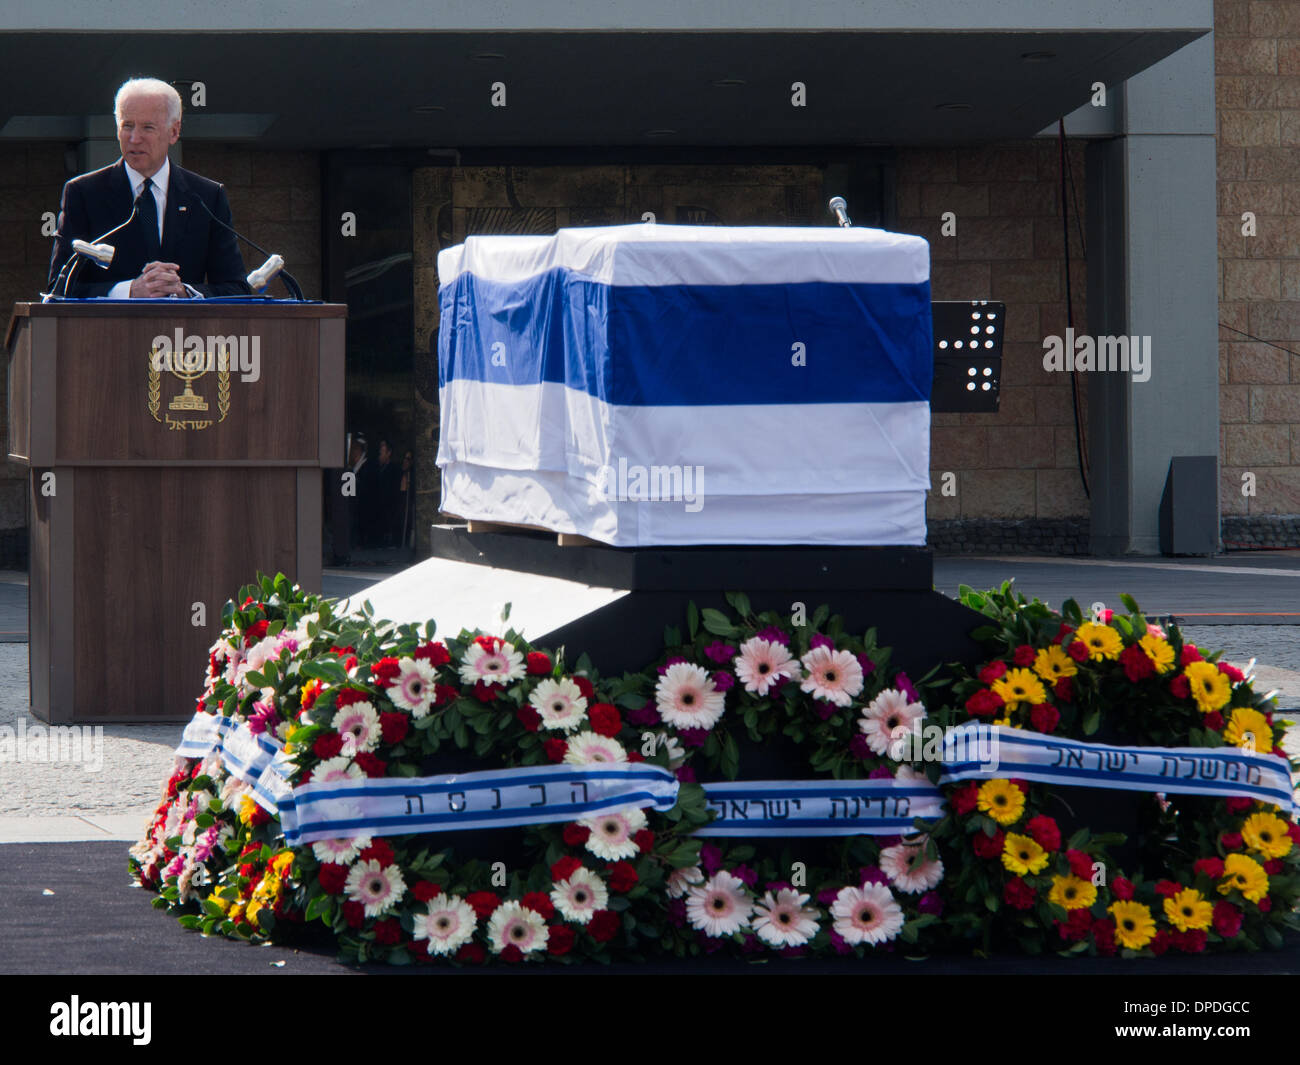 U.S. Vice President, Joe Biden, delivers a eulogy for former Israeli Prime Minister, Ariel Sharon, at the Knesset plaza at a state memorial ceremony. Biden headed one of over twenty international delegations paying last respects to Sharon. Jerusalem, Israel. 13-Jan-2014.  A state memorial ceremony was held at the Knesset for Former PM Ariel Sharon. President Peres, PM Netanyahu, Knesset Speaker Edelstein, US Vice President Biden and former British PM Blair delivered eulogies. Sharon passed away Saturday at age 85. Stock Photo